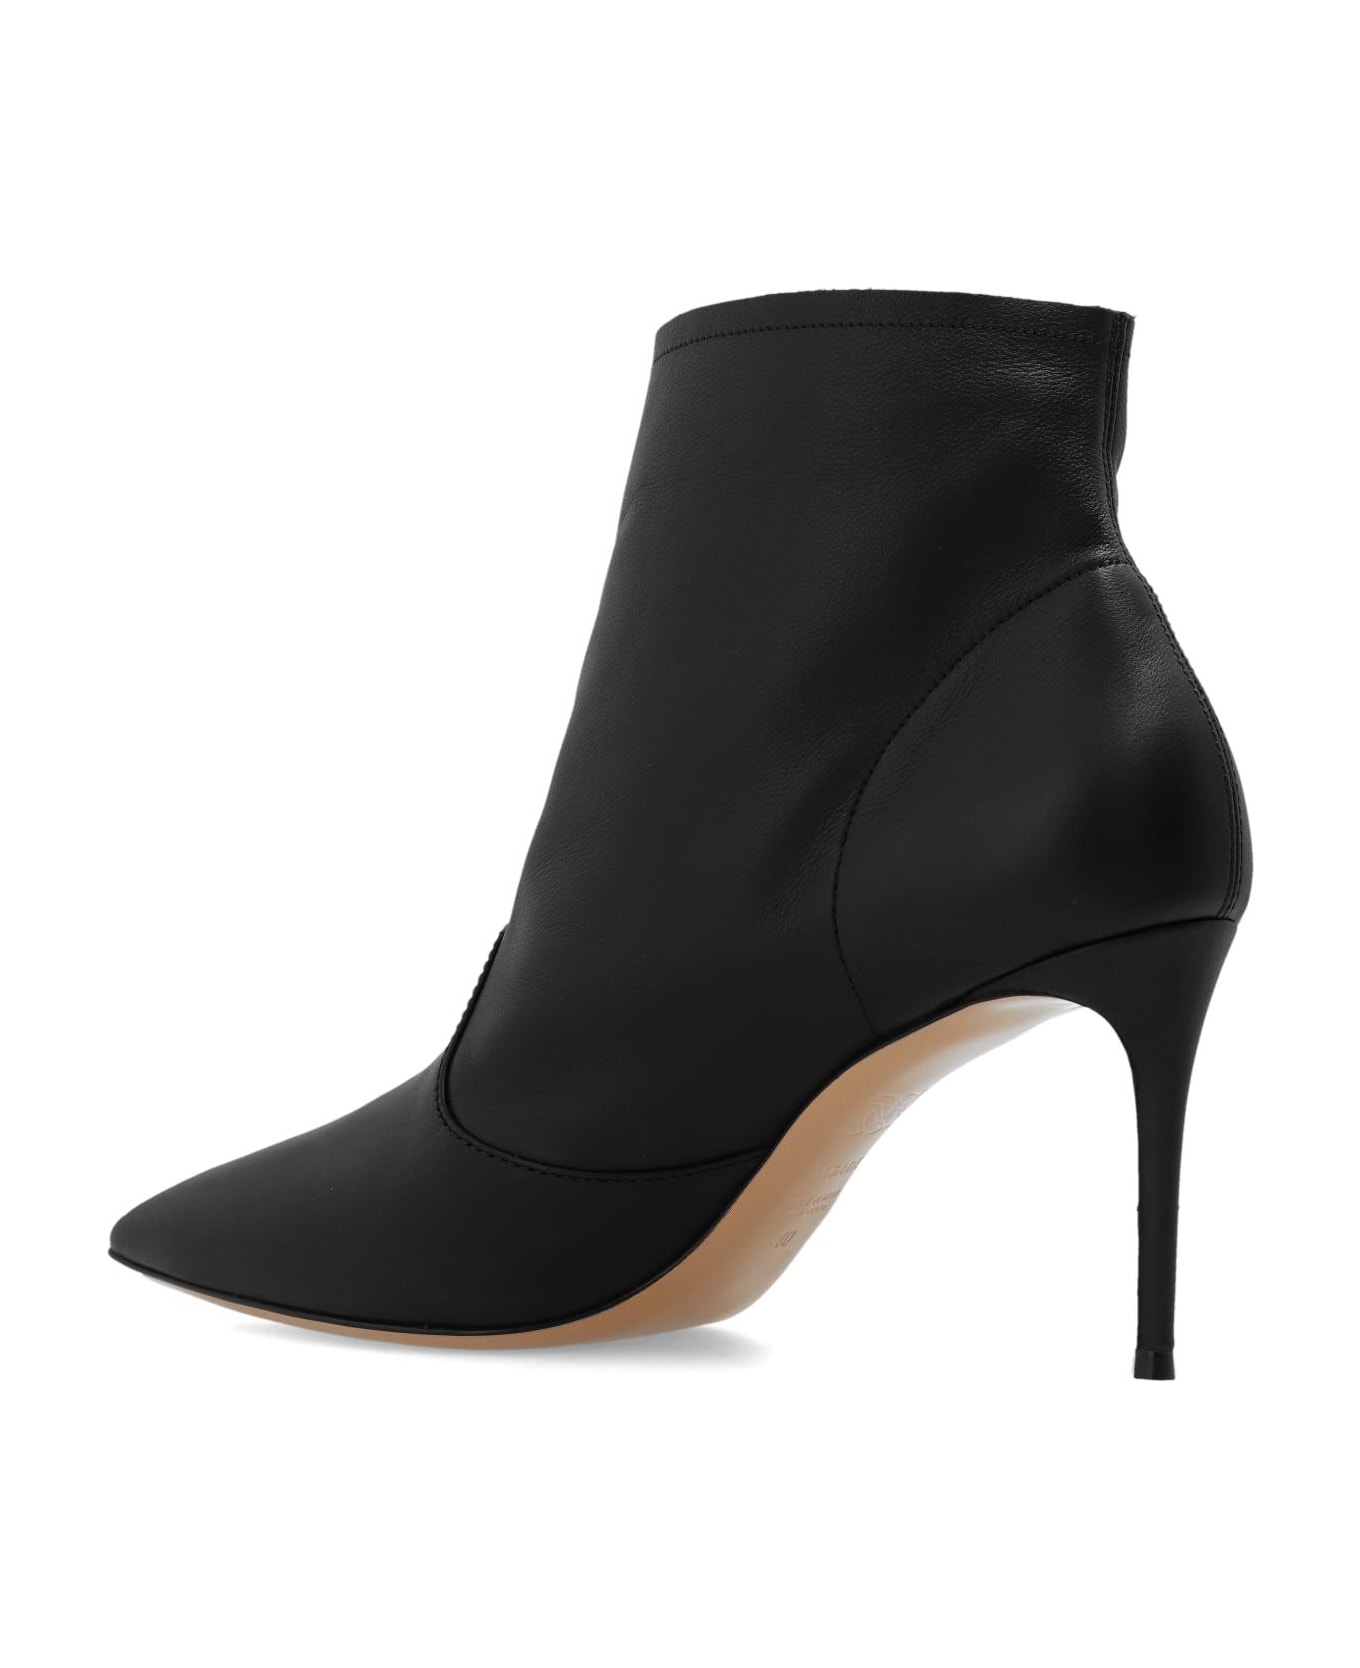 Casadei 'julia Kate' Heeled Ankle Boots - BLACK ブーツ